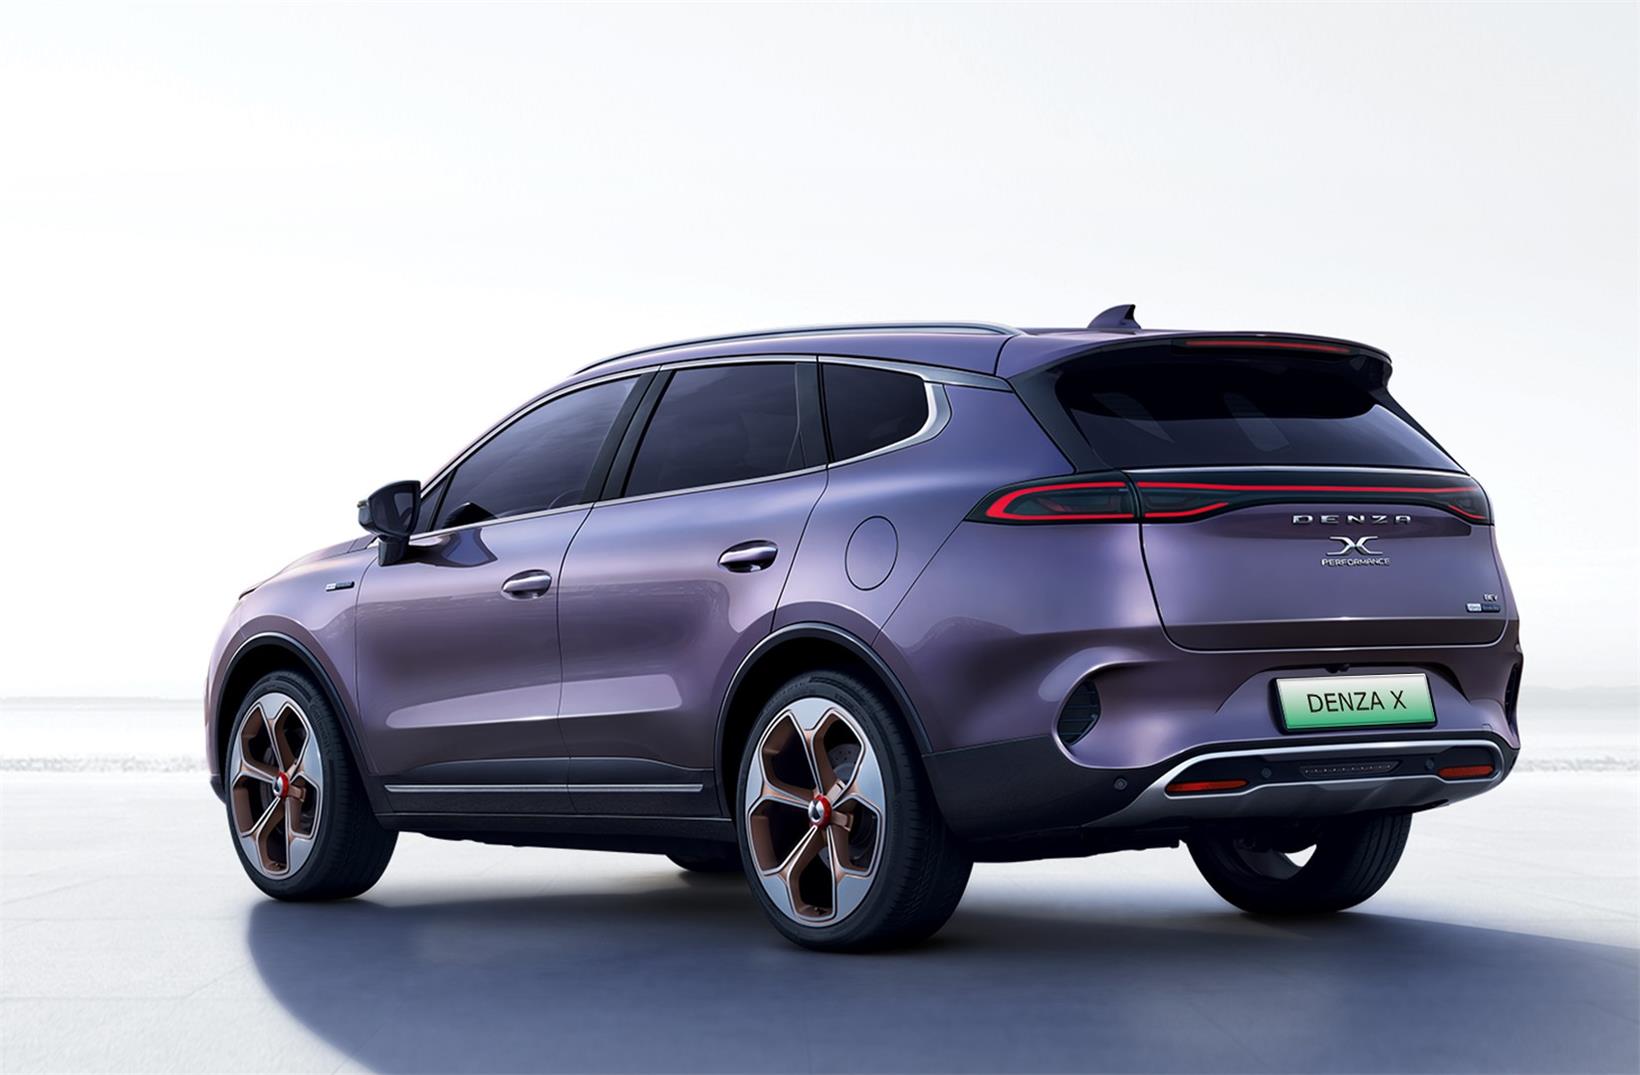 Gasgoo Daily: BYD’s DENZA to launch concept SUV model